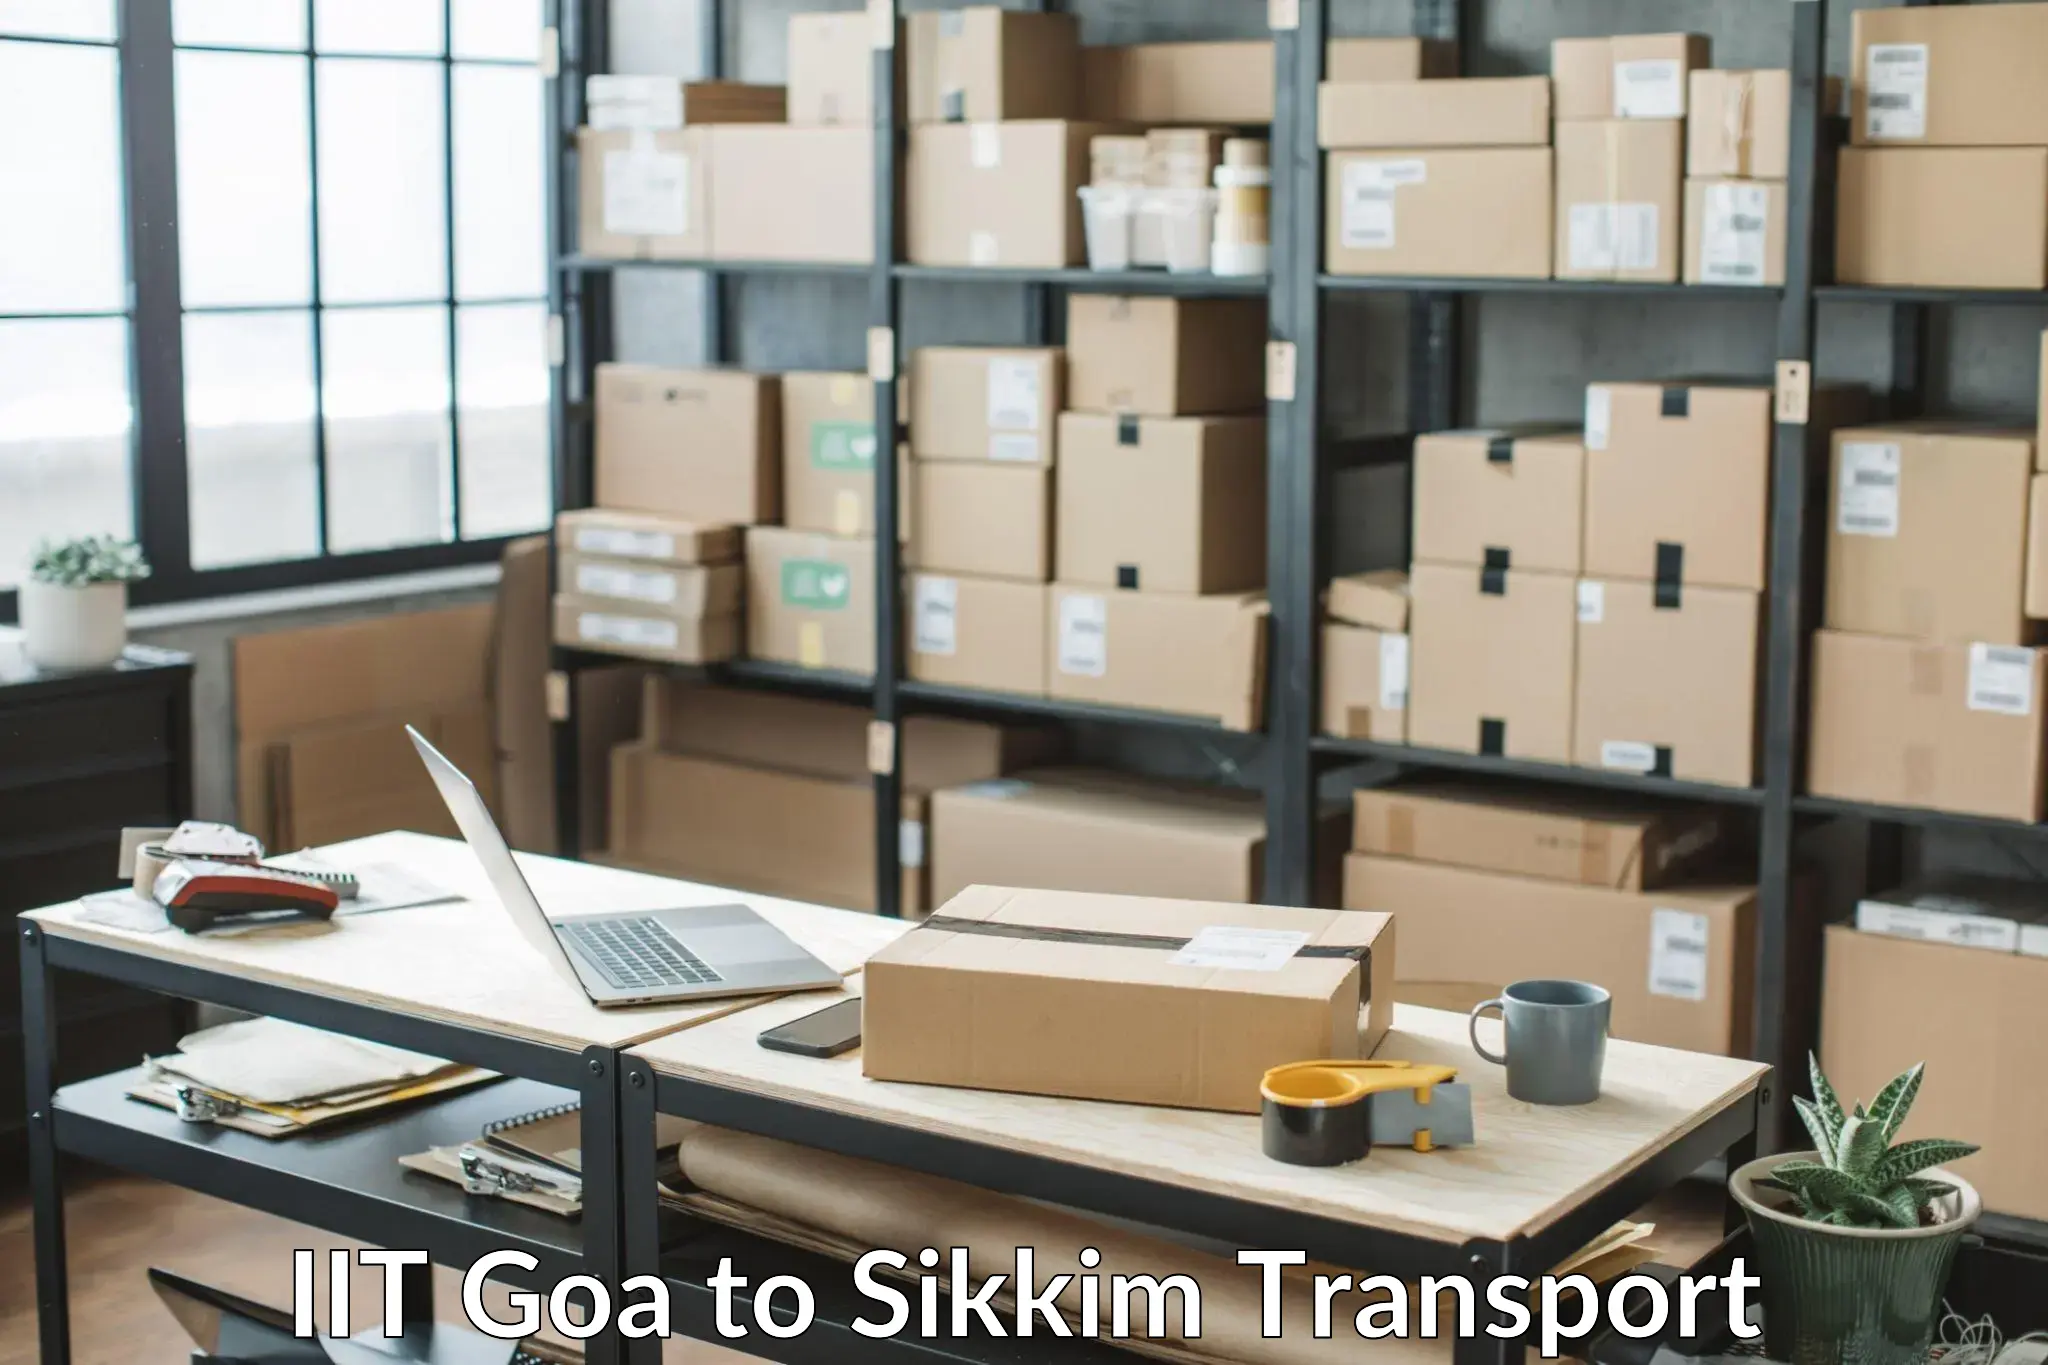 Container transport service IIT Goa to Sikkim